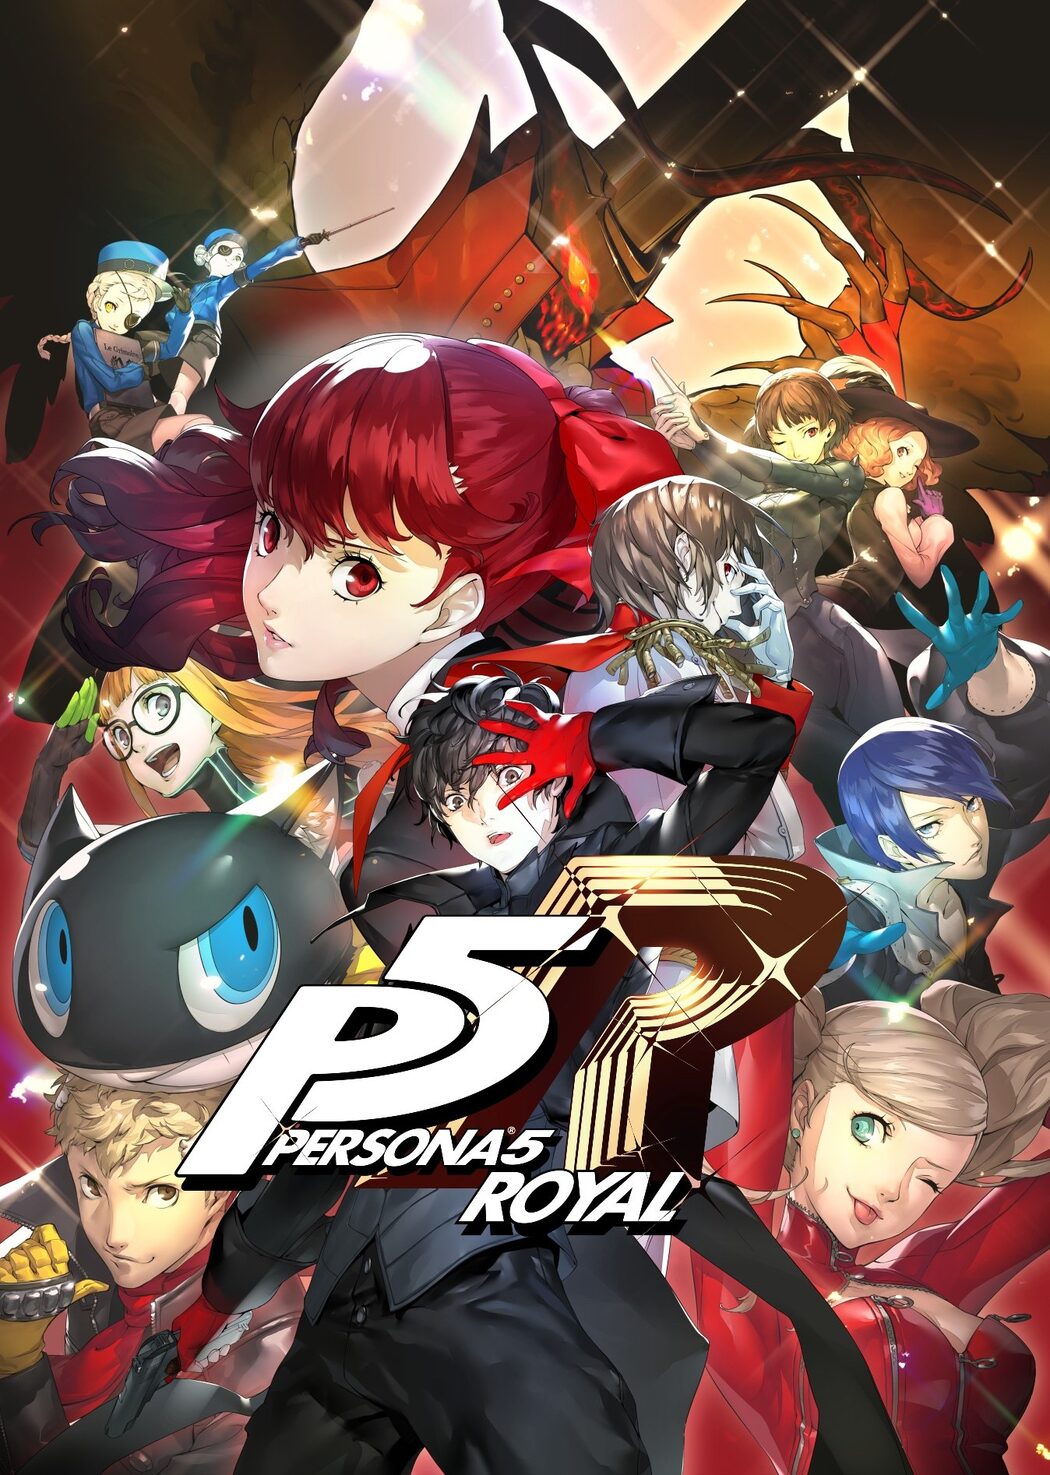 Persona 5 Royal on Steam